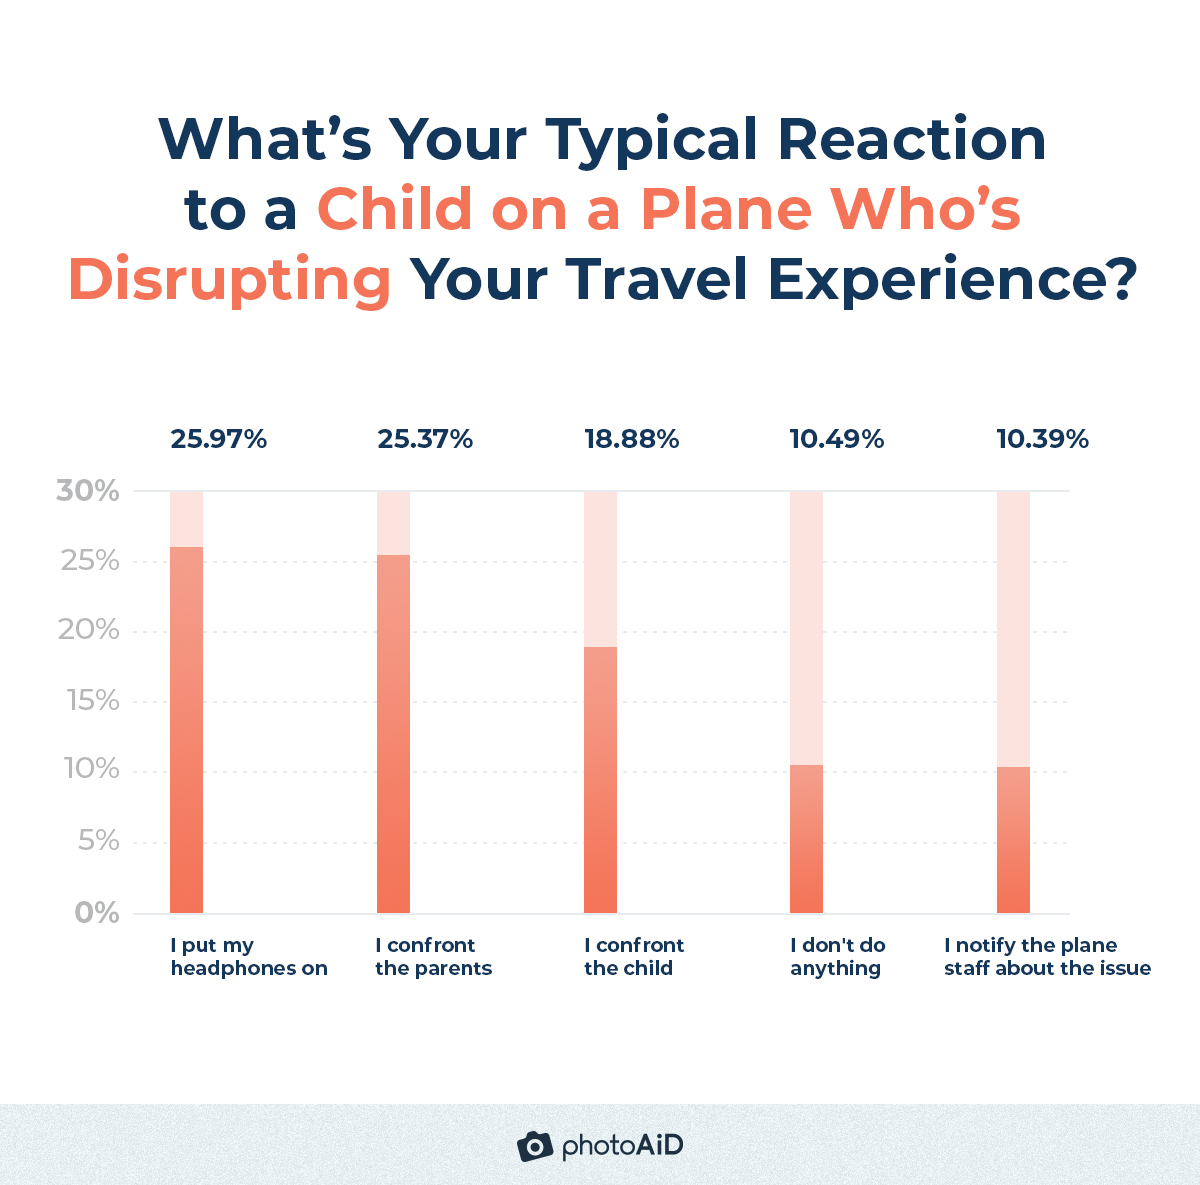 passengers usually just put on their headphones (26%)